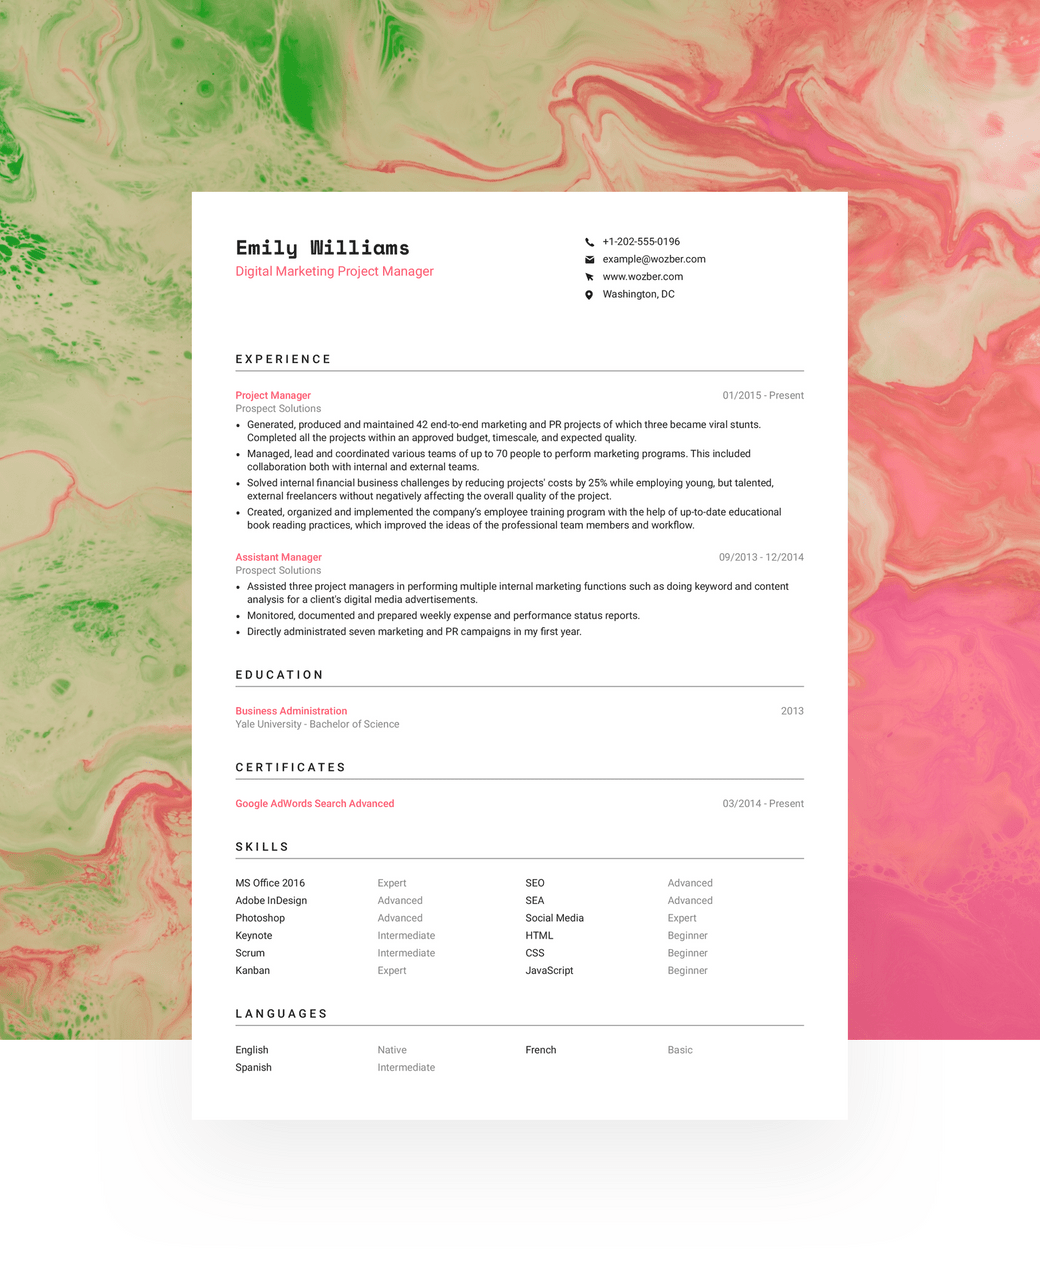 A clean-looking, ATS-friendly resume template suitable for any professional.